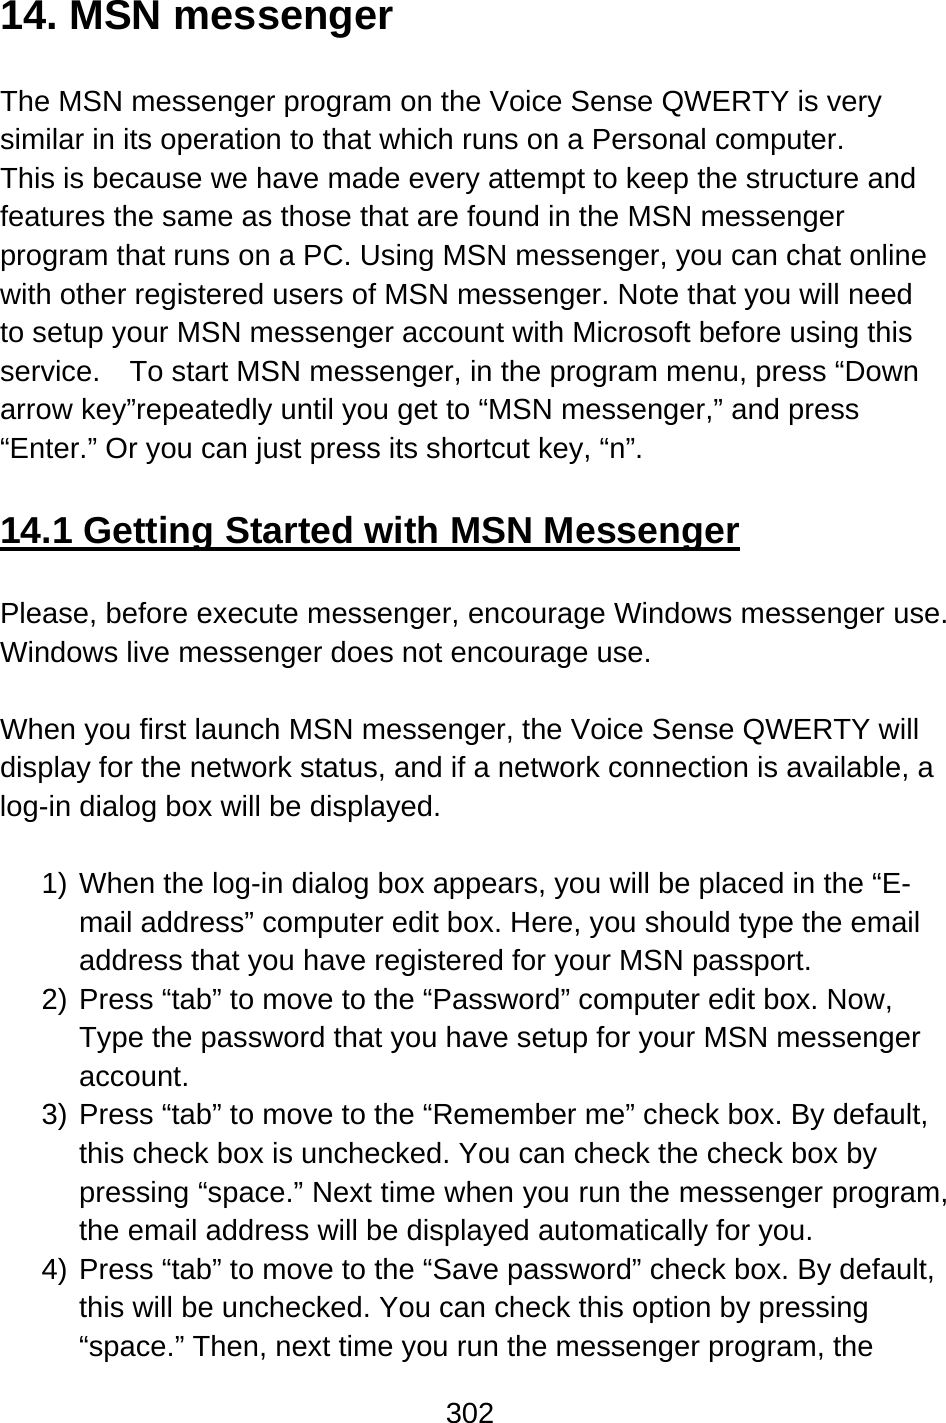 302  14. MSN messenger  The MSN messenger program on the Voice Sense QWERTY is very similar in its operation to that which runs on a Personal computer.     This is because we have made every attempt to keep the structure and features the same as those that are found in the MSN messenger program that runs on a PC. Using MSN messenger, you can chat online with other registered users of MSN messenger. Note that you will need to setup your MSN messenger account with Microsoft before using this service.  To start MSN messenger, in the program menu, press “Down arrow key”repeatedly until you get to “MSN messenger,” and press “Enter.” Or you can just press its shortcut key, “n”.  14.1 Getting Started with MSN Messenger  Please, before execute messenger, encourage Windows messenger use. Windows live messenger does not encourage use.  When you first launch MSN messenger, the Voice Sense QWERTY will display for the network status, and if a network connection is available, a log-in dialog box will be displayed.  1) When the log-in dialog box appears, you will be placed in the “E-mail address” computer edit box. Here, you should type the email address that you have registered for your MSN passport.     2) Press “tab” to move to the “Password” computer edit box. Now, Type the password that you have setup for your MSN messenger account.   3) Press “tab” to move to the “Remember me” check box. By default, this check box is unchecked. You can check the check box by pressing “space.” Next time when you run the messenger program, the email address will be displayed automatically for you. 4) Press “tab” to move to the “Save password” check box. By default, this will be unchecked. You can check this option by pressing “space.” Then, next time you run the messenger program, the 